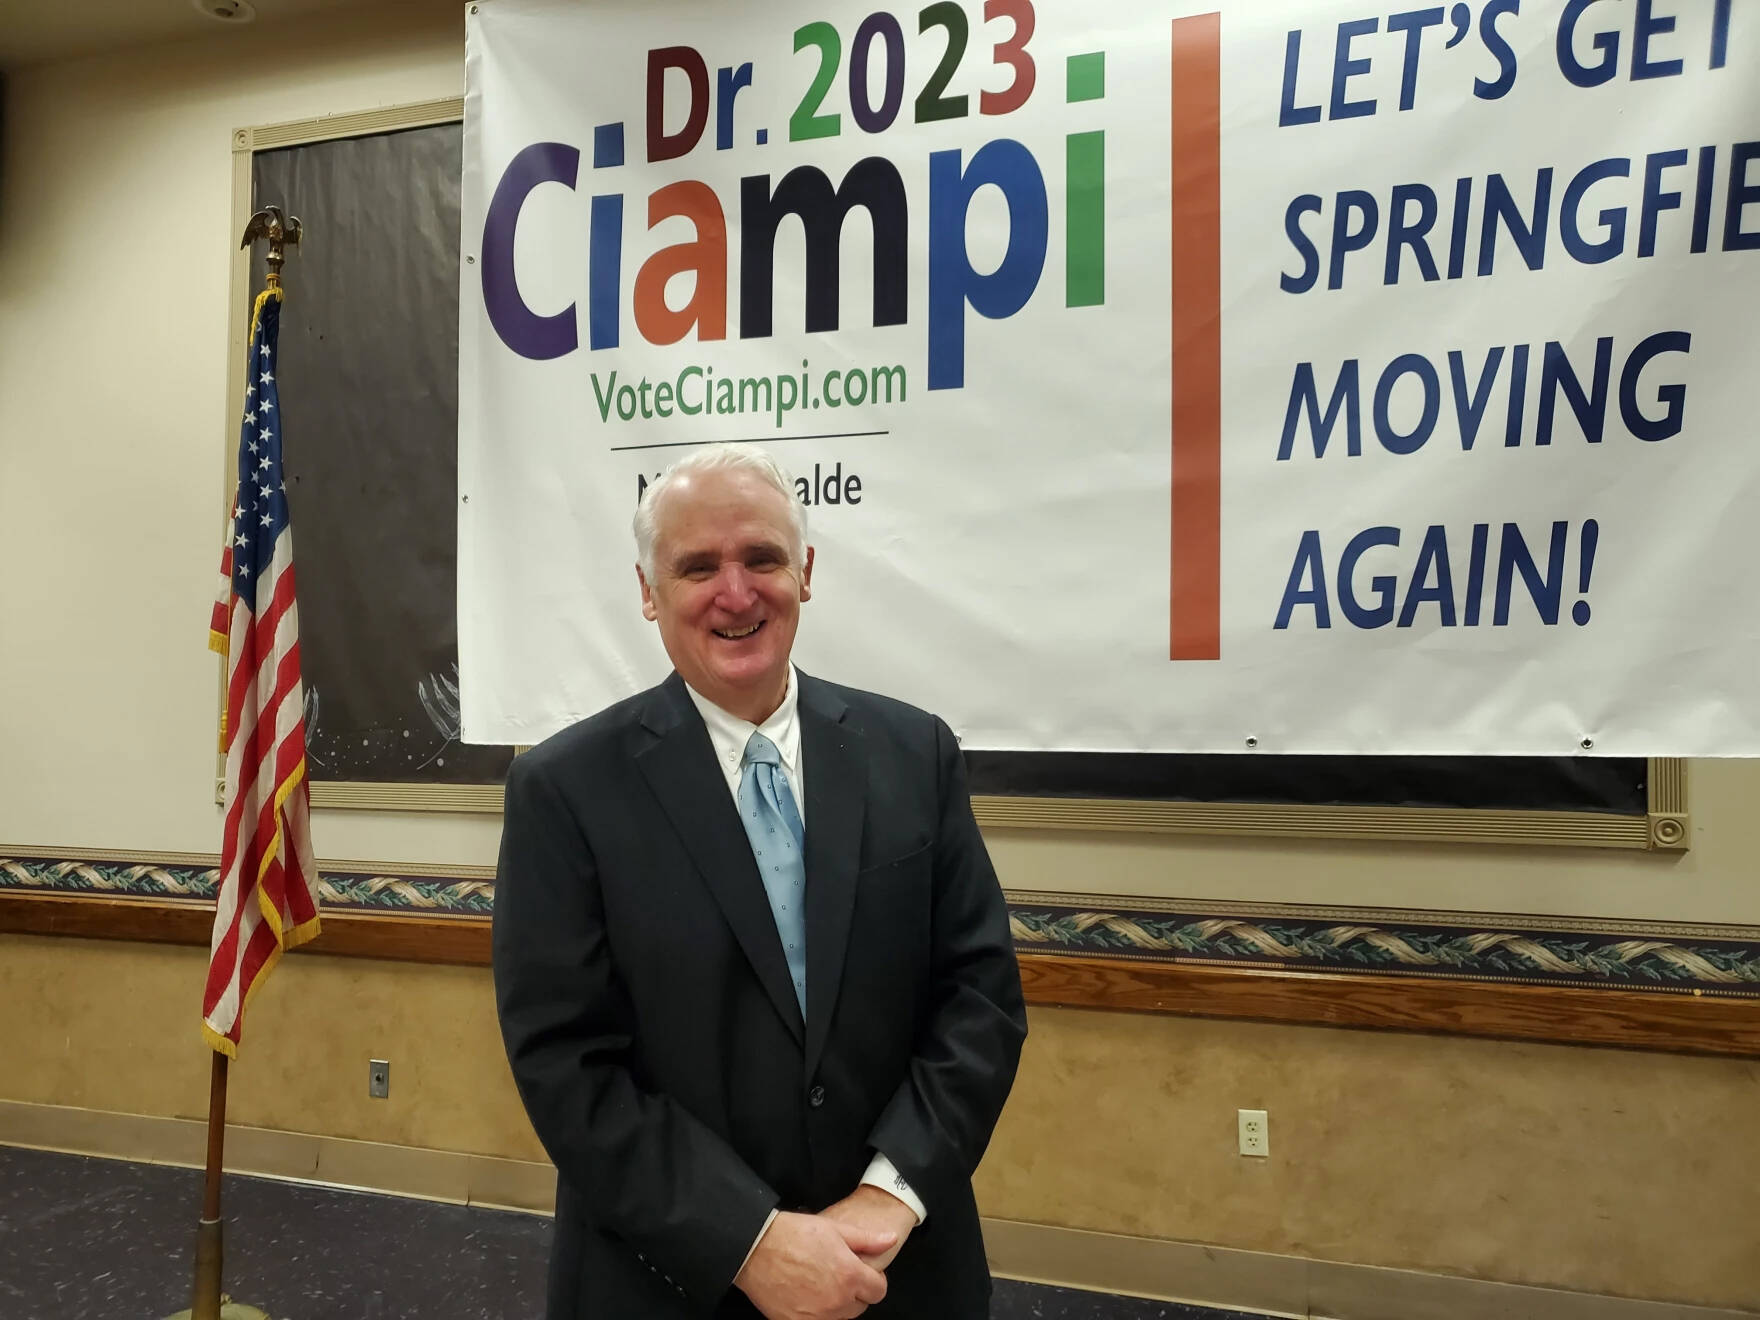 Longtime Springfield resident David Ciampi kicked off his campaign for Springfield mayor on Wednesday, Jan. 25, 2023, at the Elks Lodge in Springfield, Mass. (Elizabeth Román/NEPM)